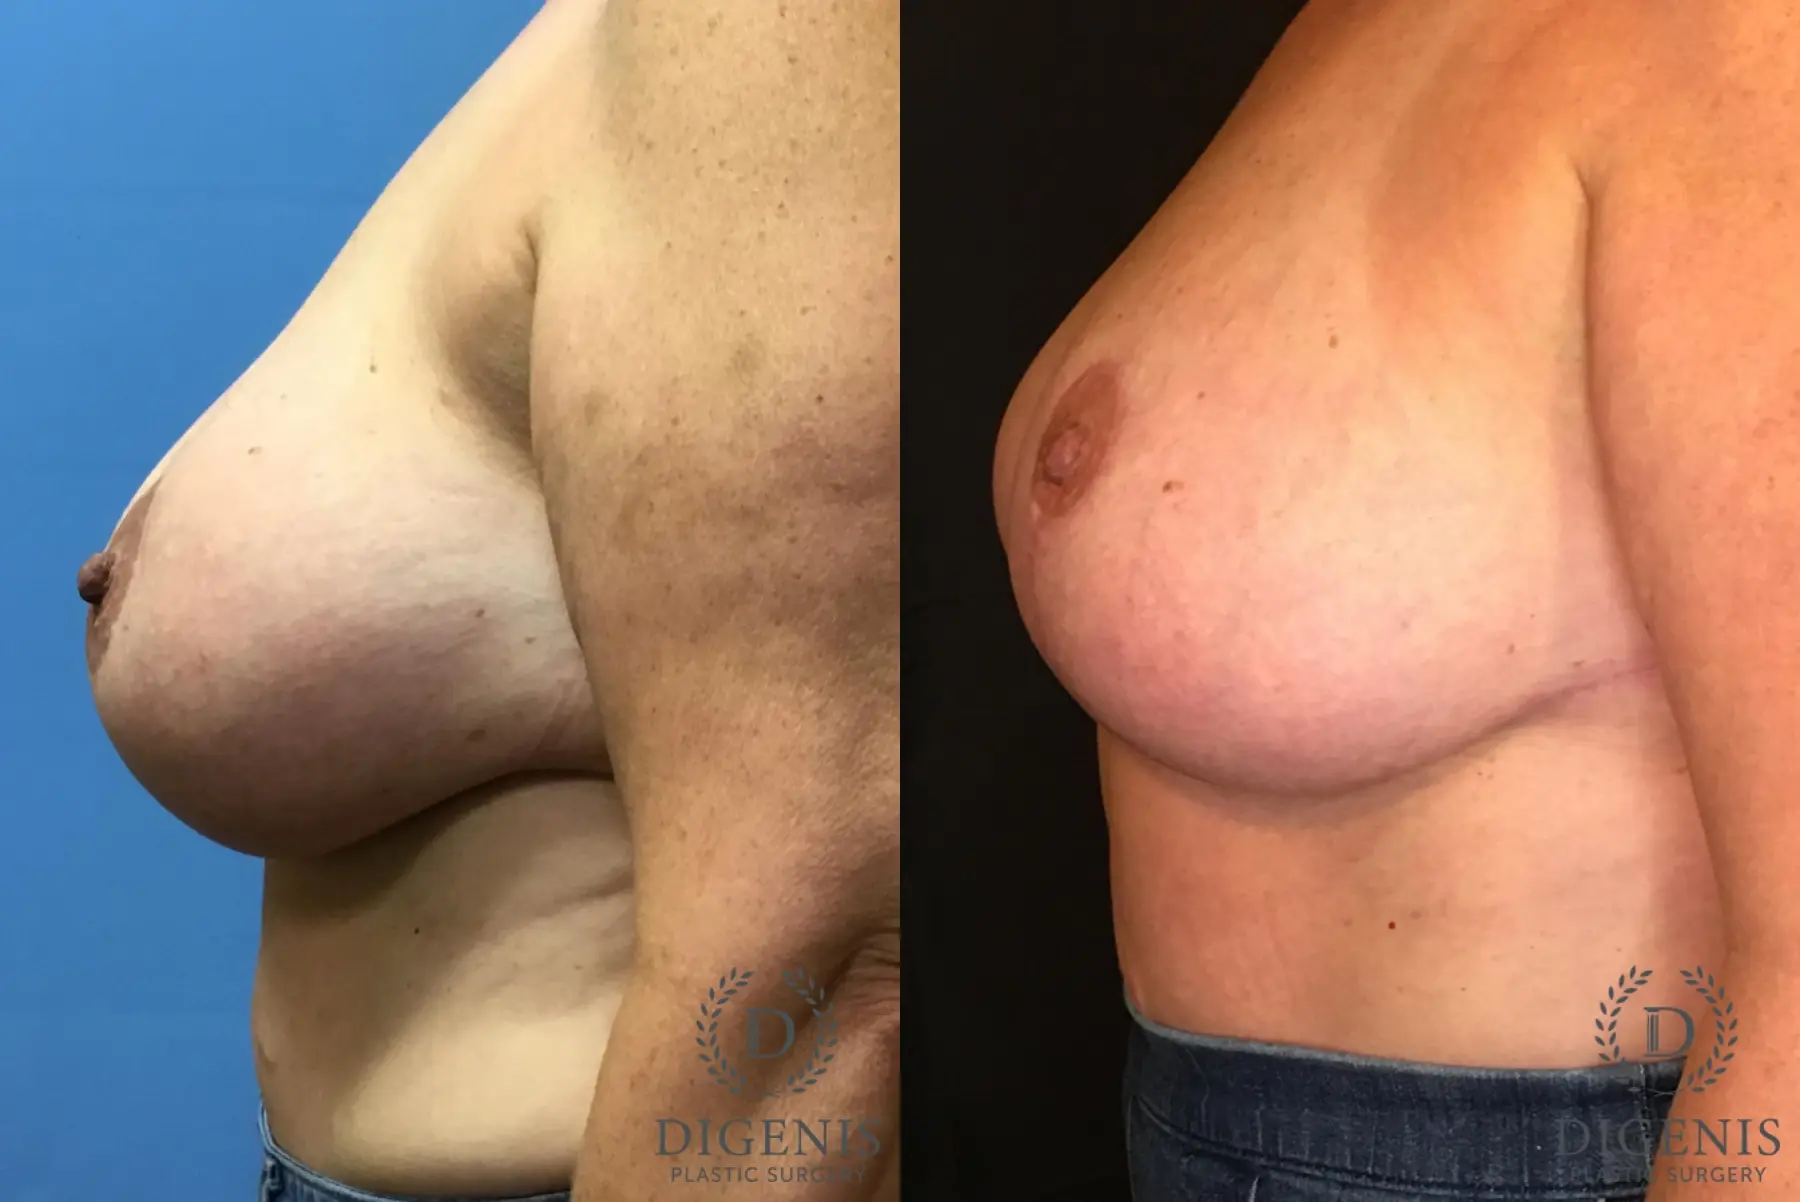 Breast Lift With Implants: Patient 4 - Before and After 4